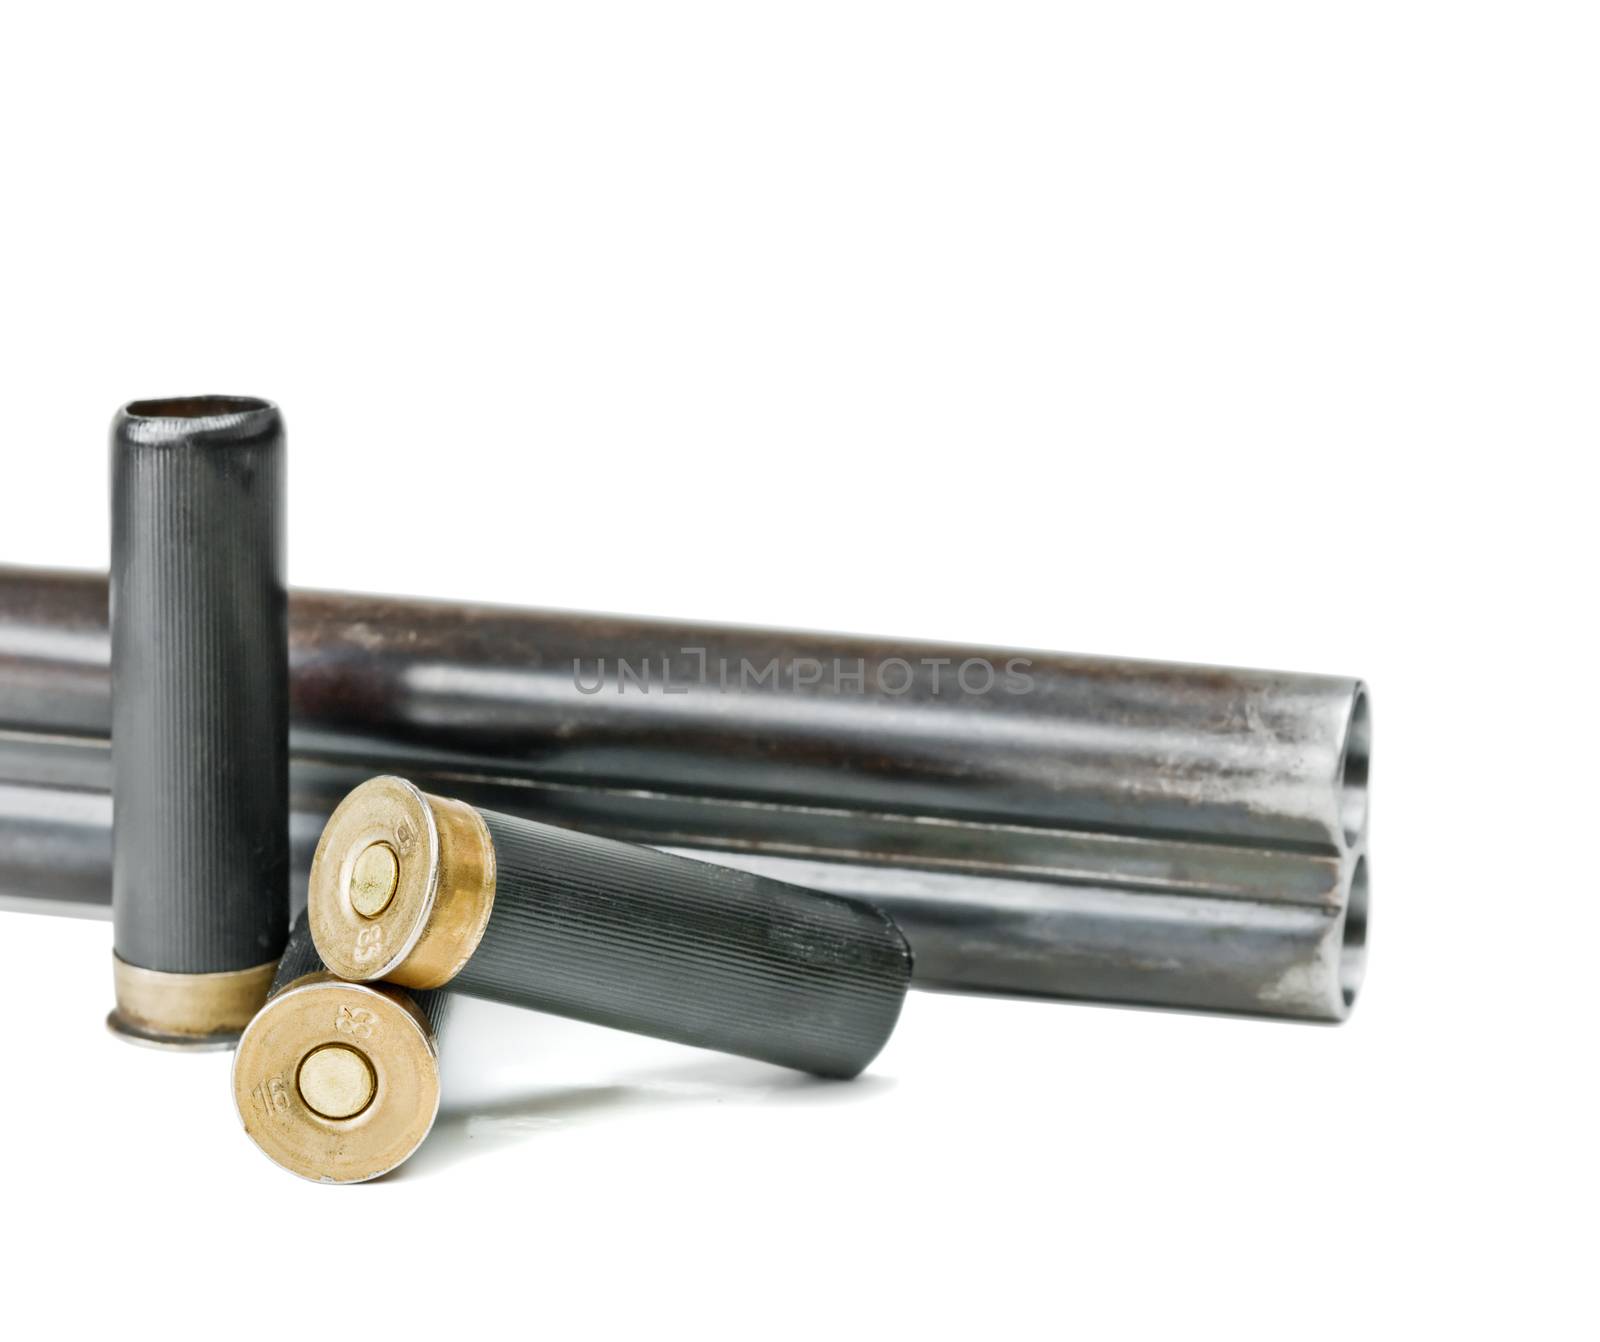 Hunting shotgun barrels and three black cartridges isolated on a white background